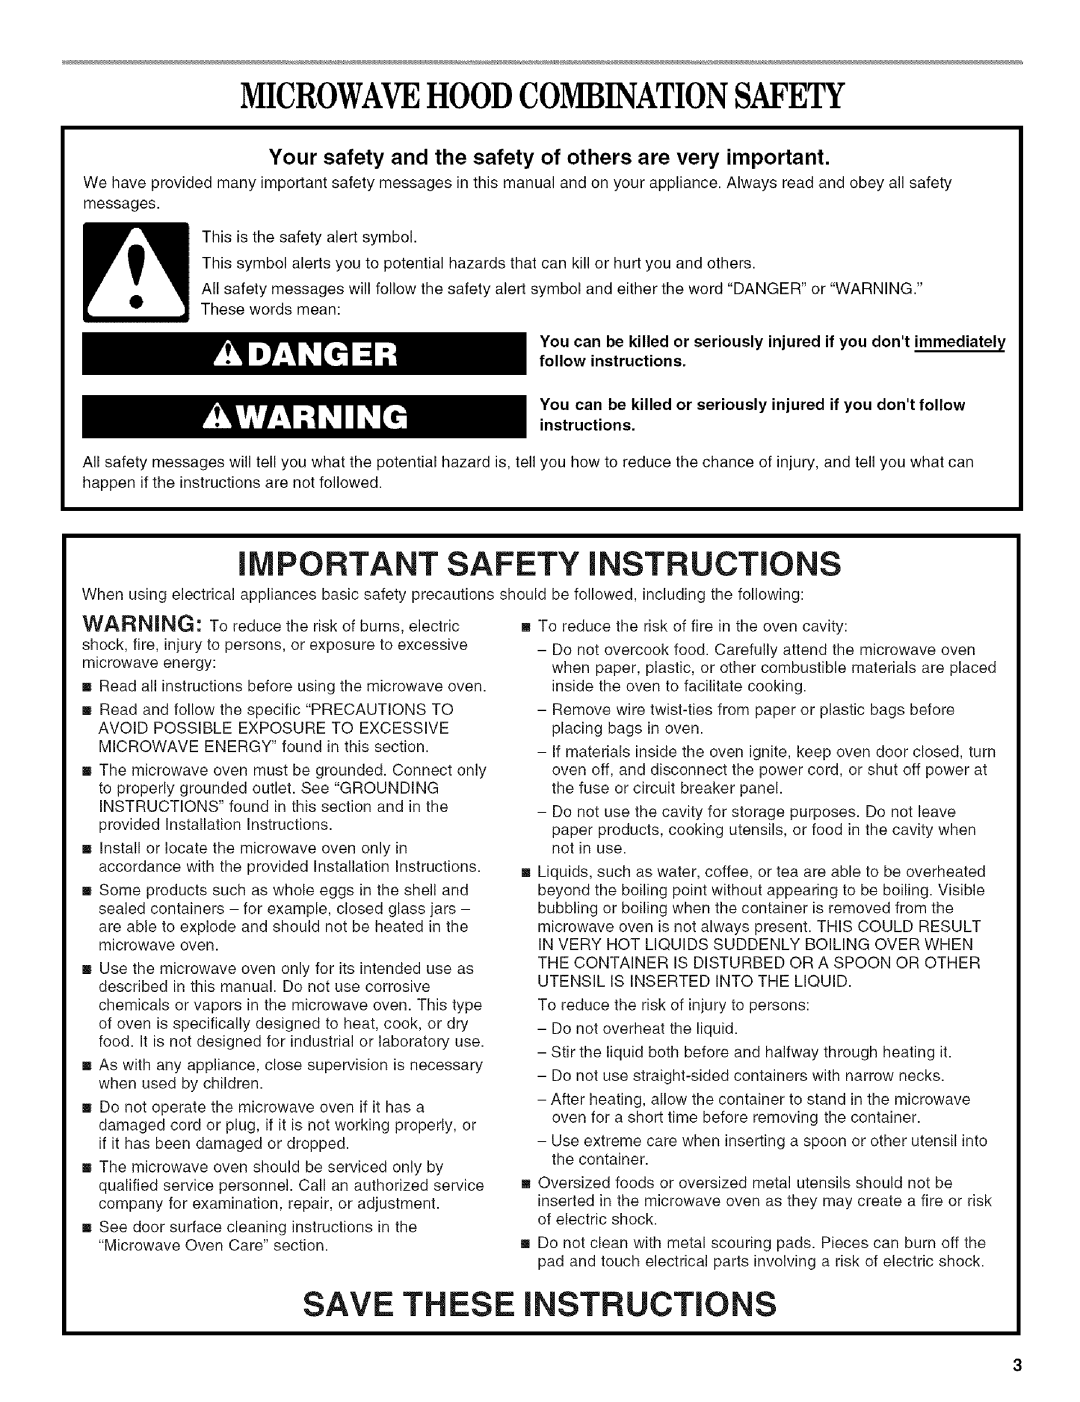 Whirlpool MODEL MH1170XS manual Microwavehoodcombinationsafety, Safety, Save These Instructions 